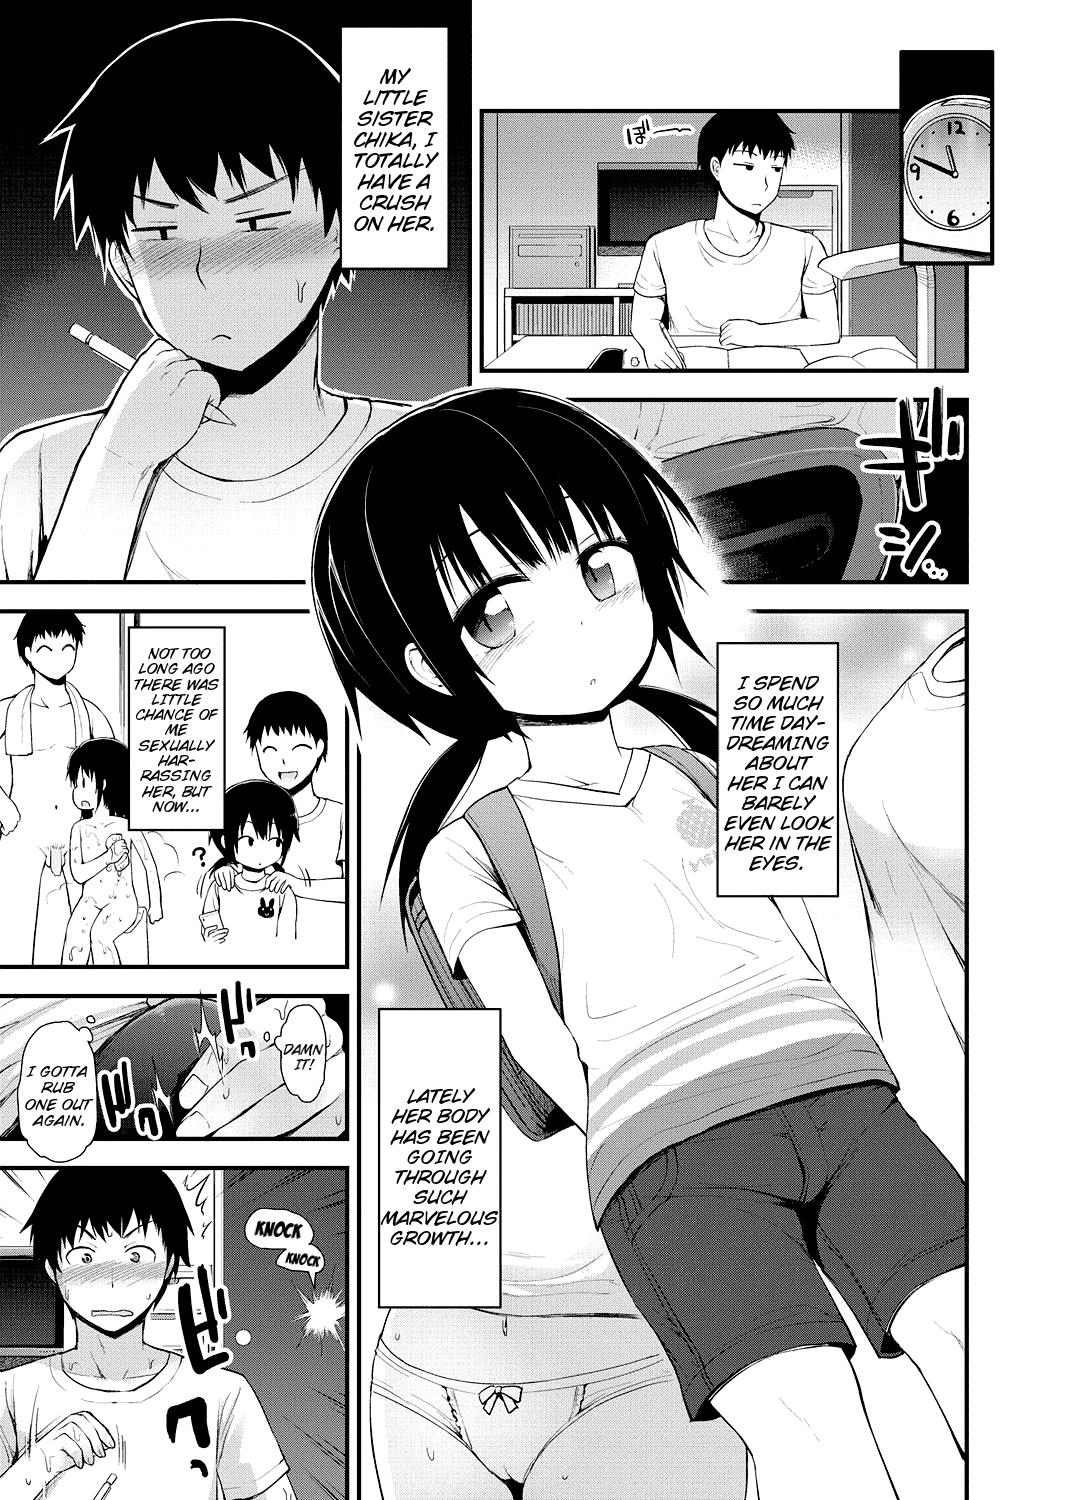 Mexican Imouto ga Ichiban Kawaii | Little Sister Is The Cutest Menage - Page 3